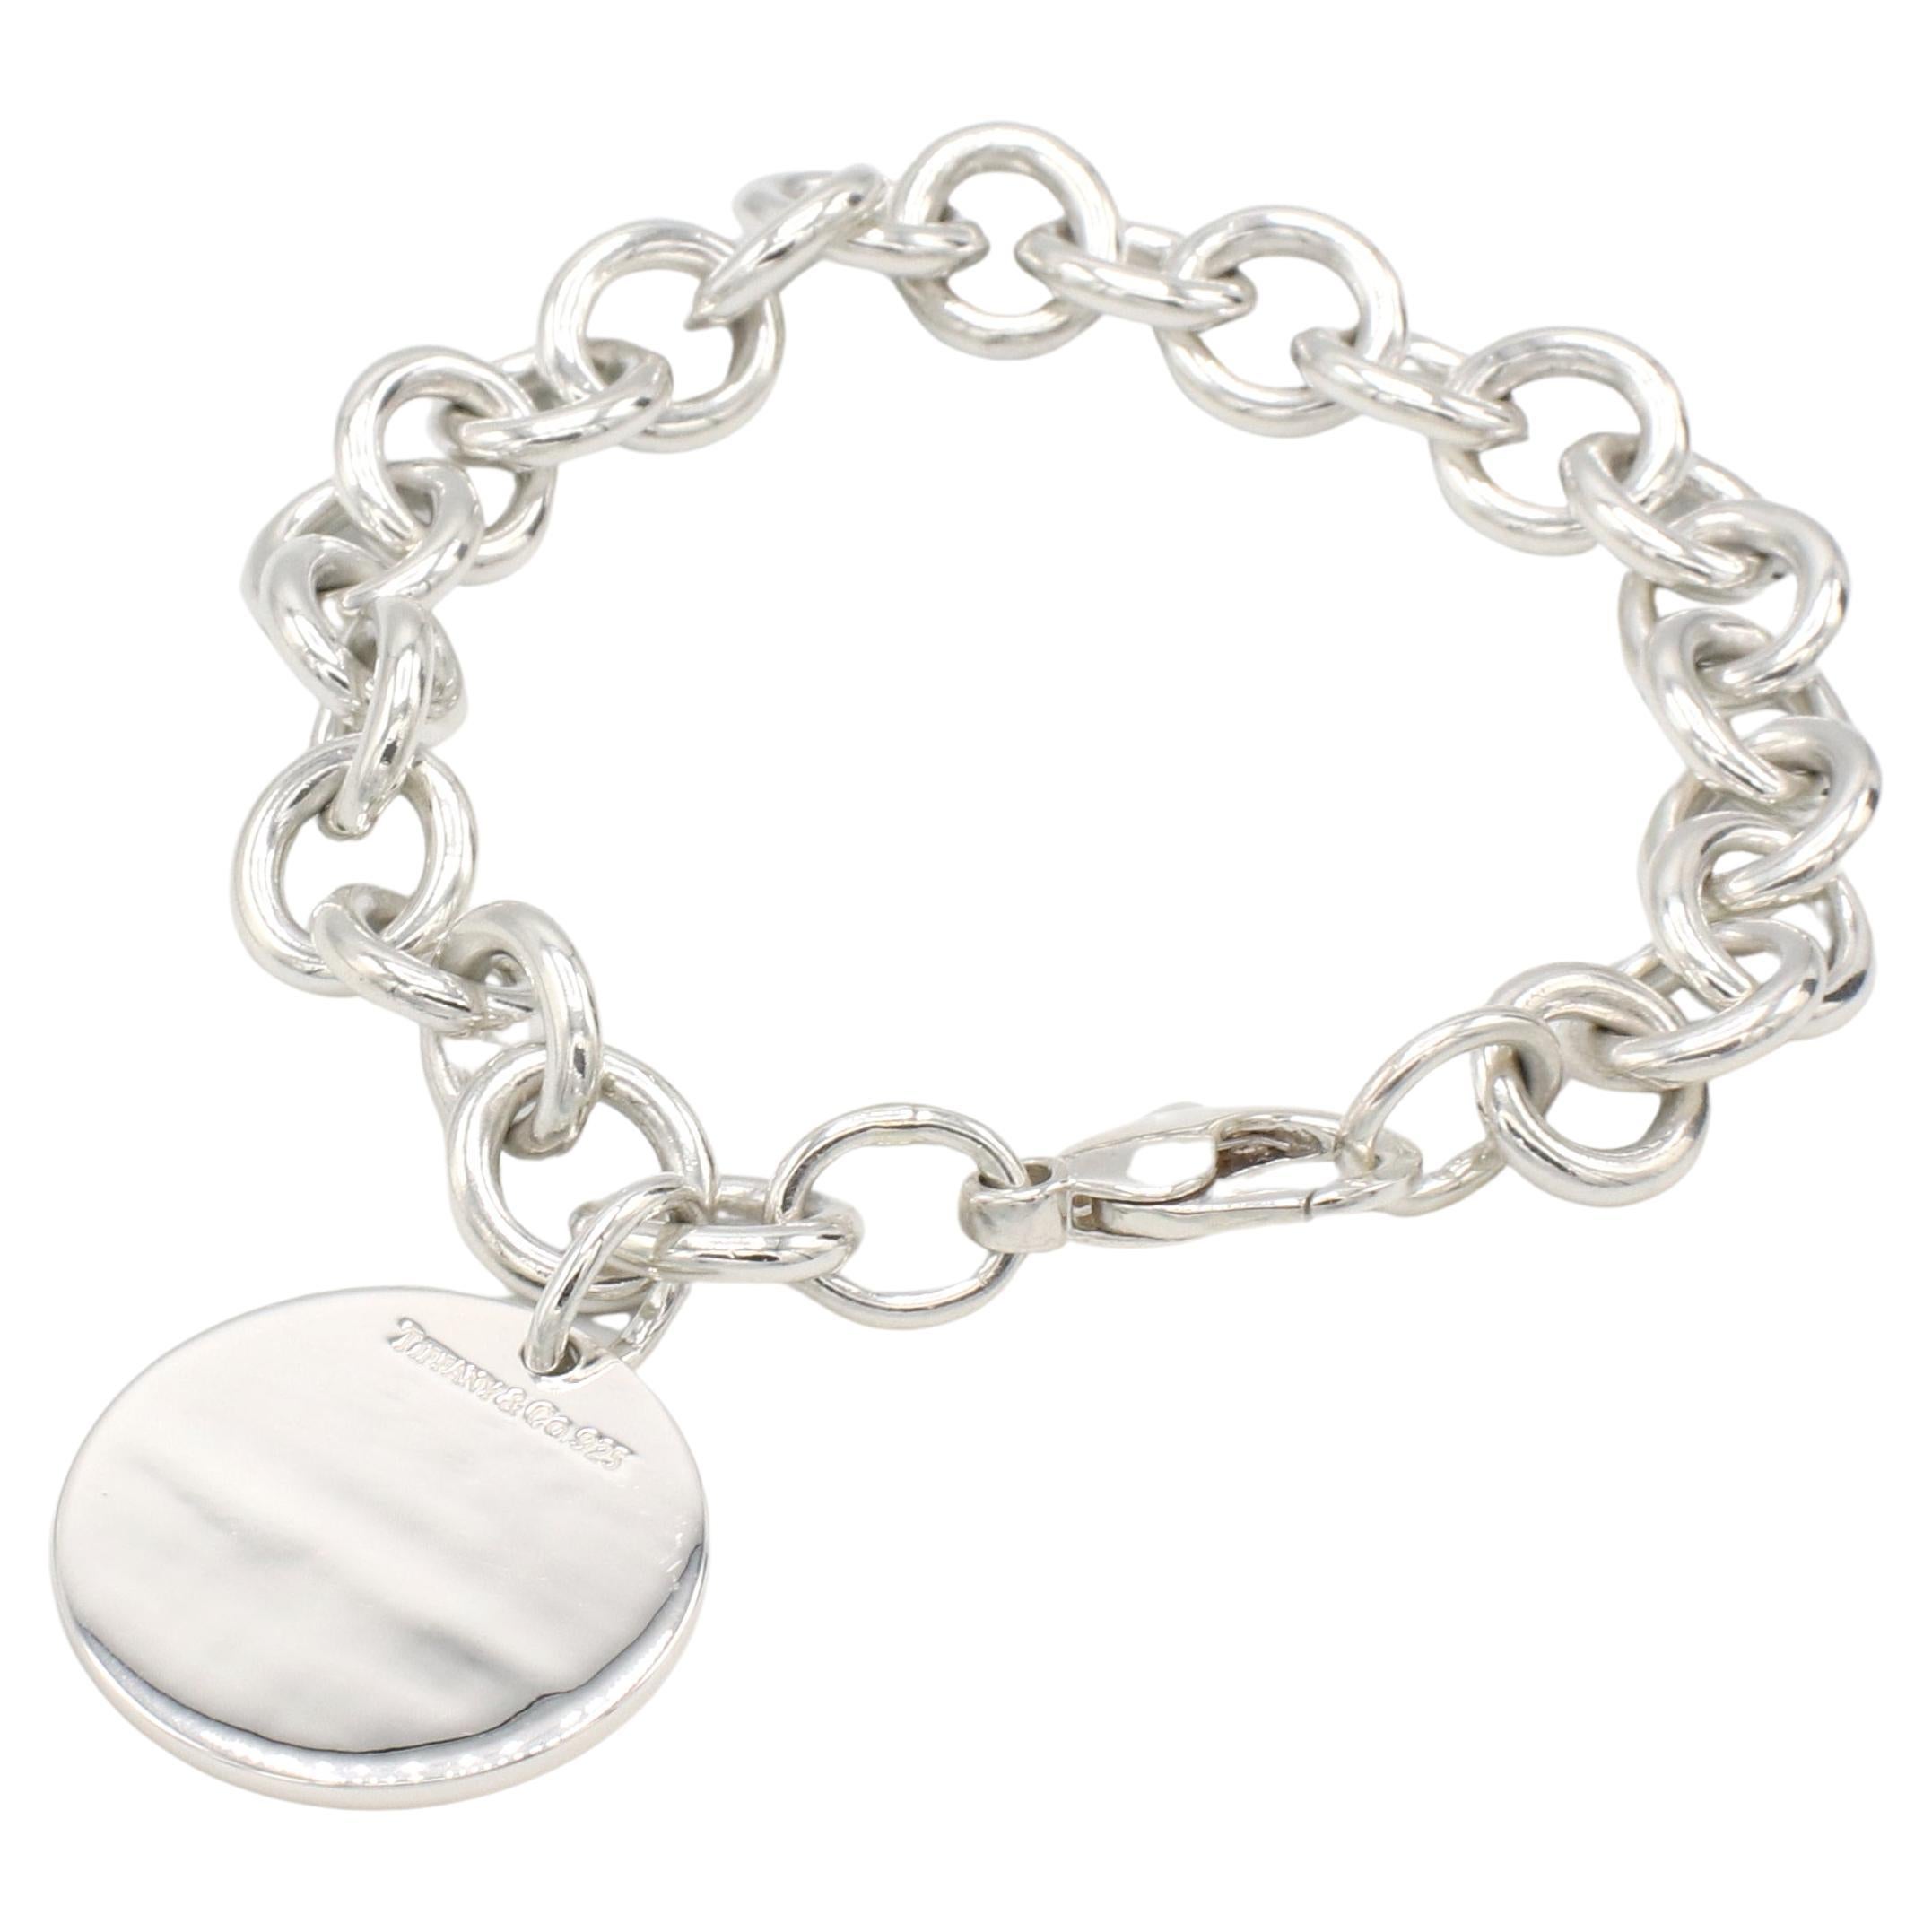 Tiffany & Co. Sterling Silver Chain Link Circle Charm Disc Bracelet 
Metal: Sterling silver
Weight: 35.8 grams
Length: 7.5 inches
Links: 10 x 11mm
Charm: 23.5mm
Signed: Tiffany & Co. 925
